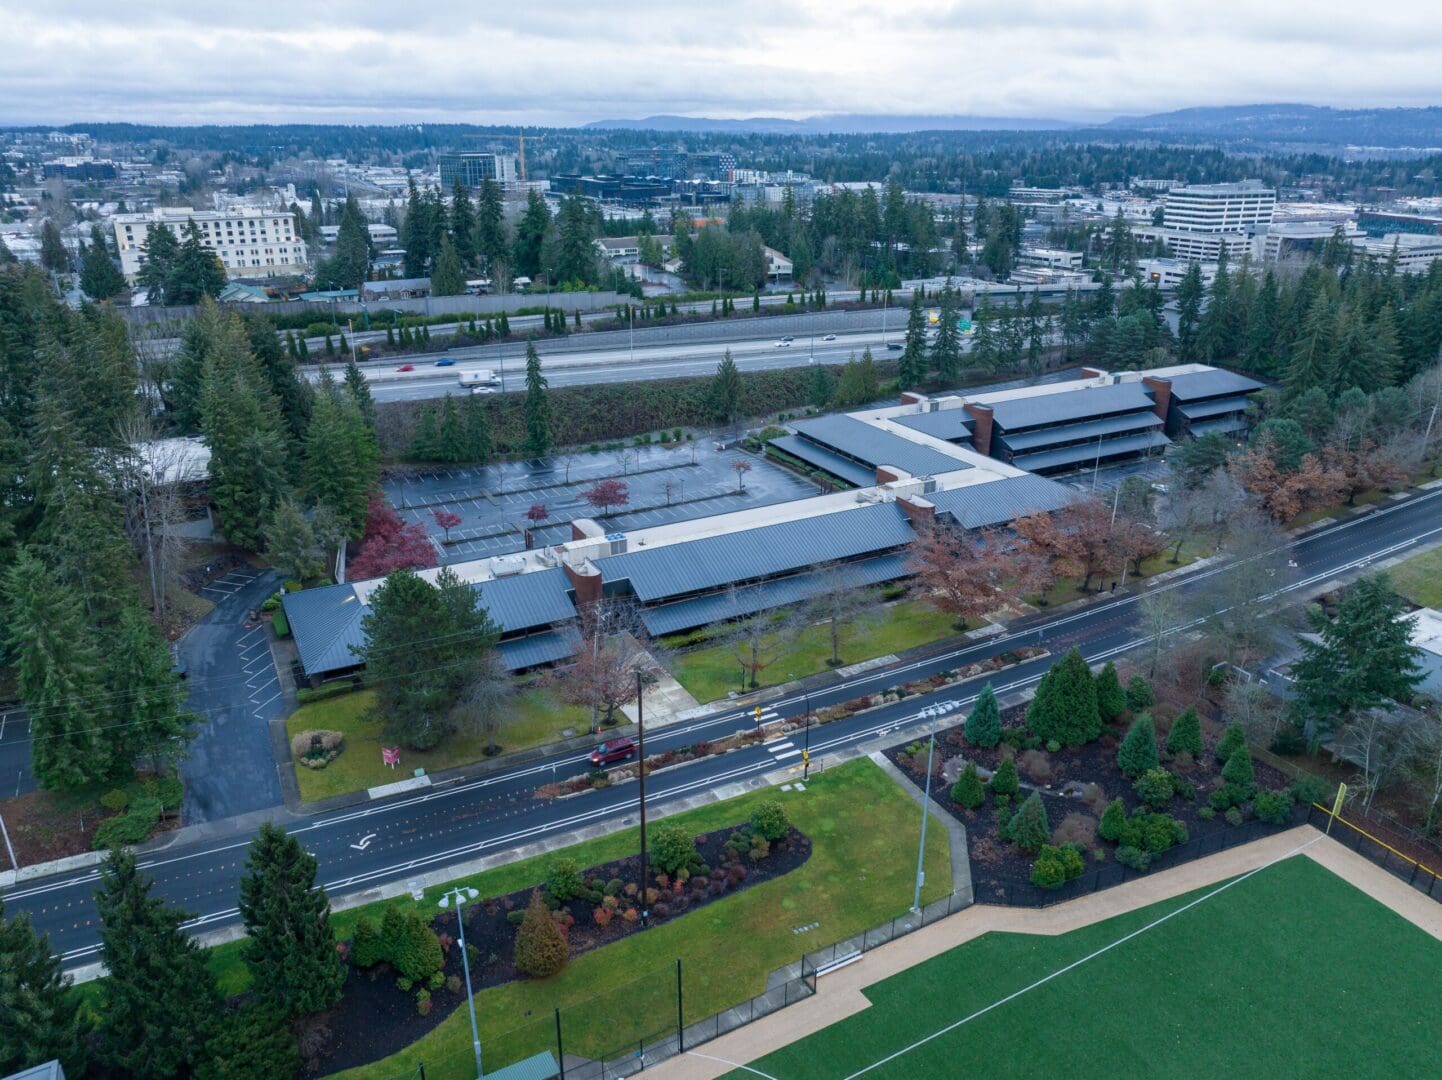 An aerial view of a campus with a soccer field and trees.